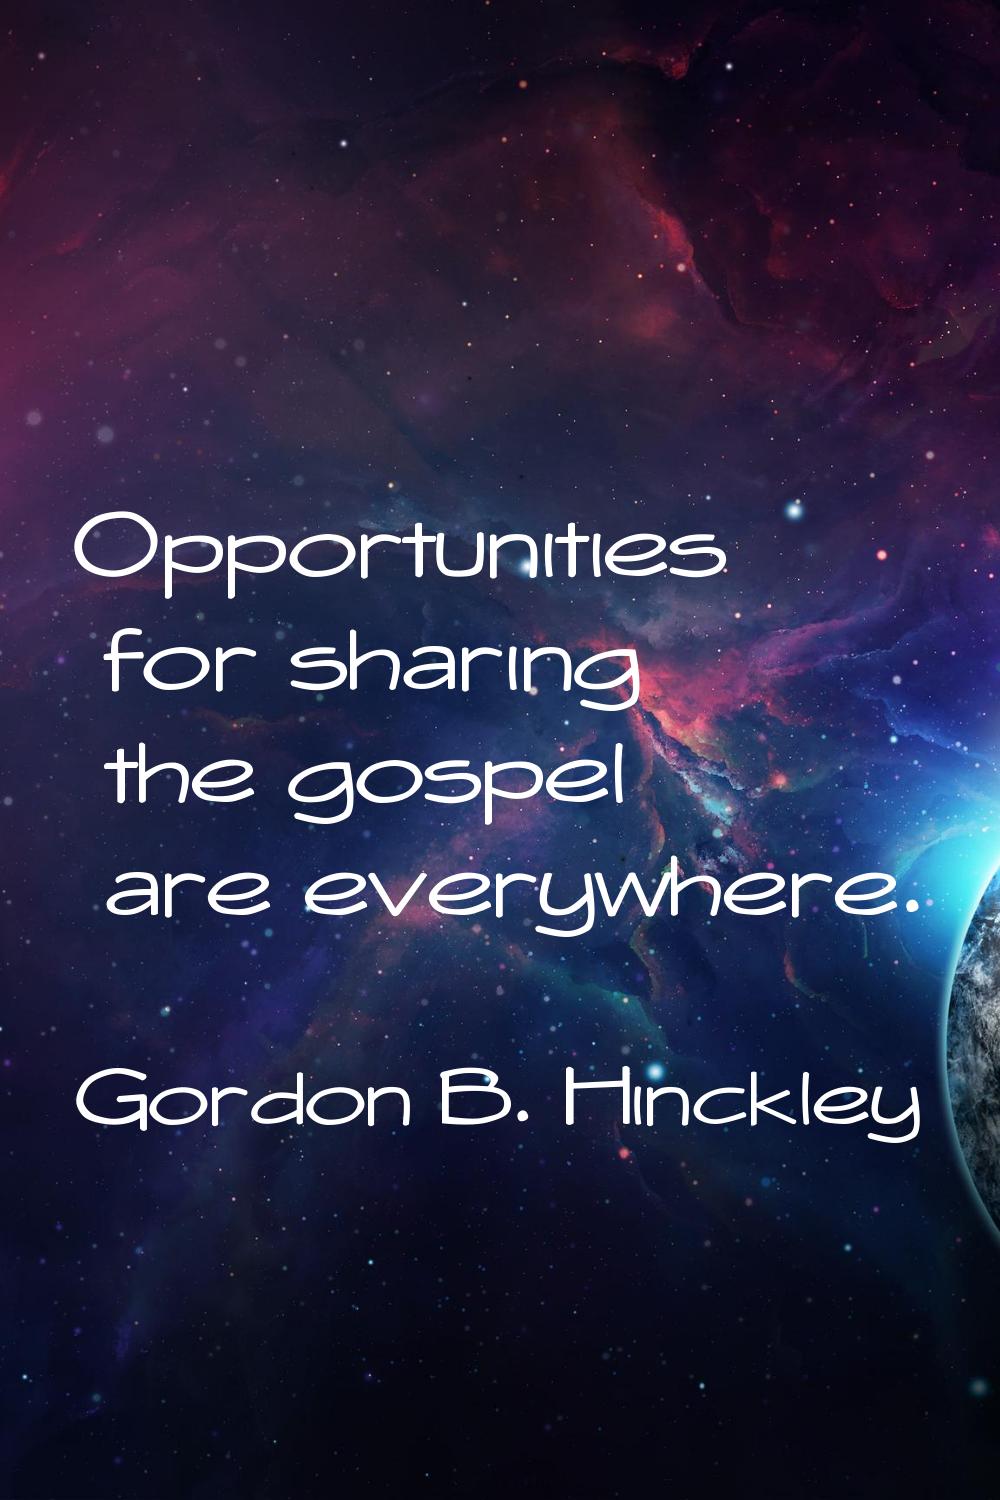 Opportunities for sharing the gospel are everywhere.